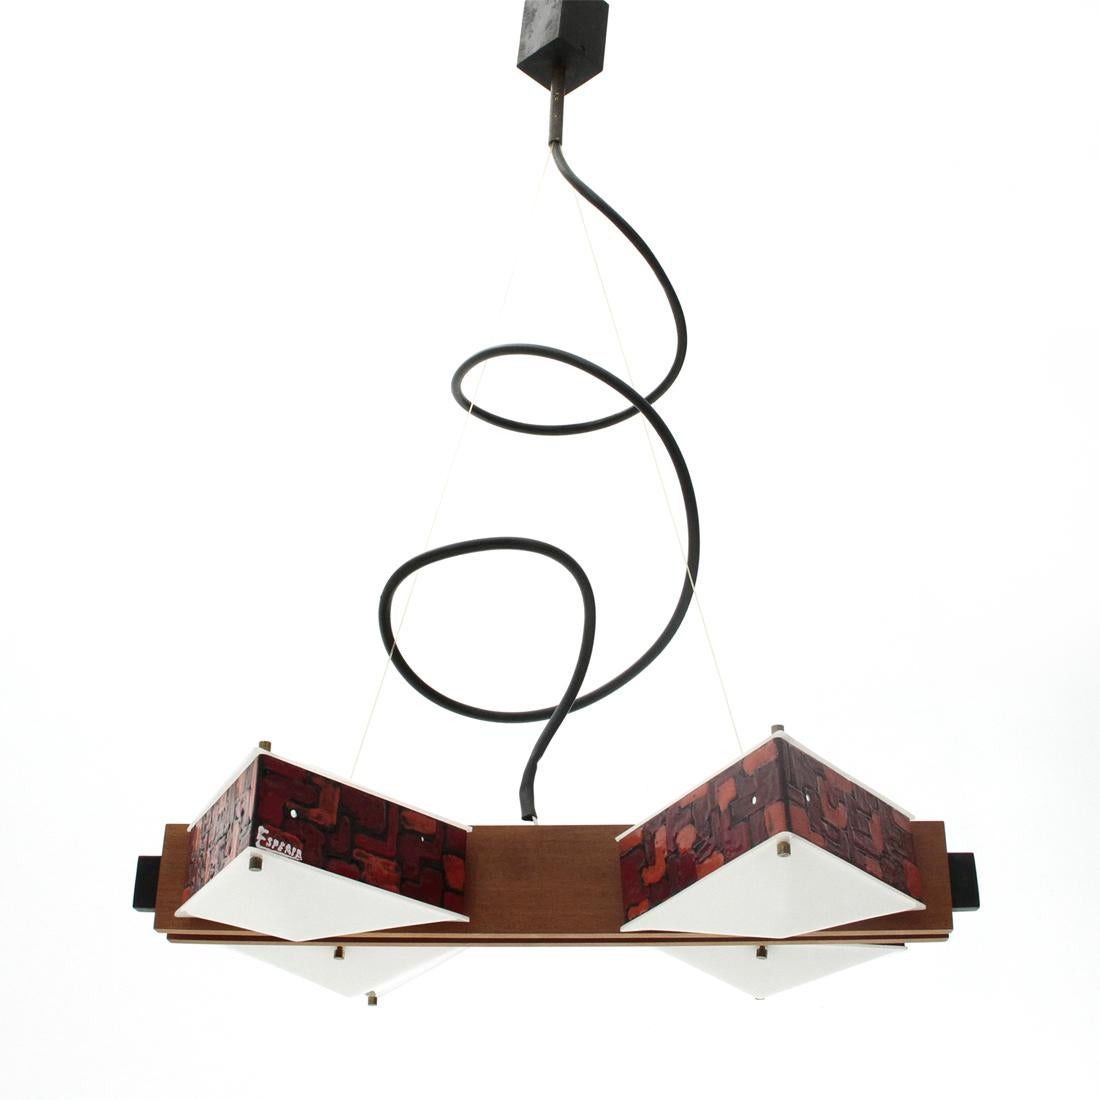 Chandelier made by Esperia in the 1960s on a project by Angelo Brotto.
Central body in black painted metal, covered with two teak bands.
Diffusers in enameled metal and white perspex.
Good general conditions, some signs due to normal use over